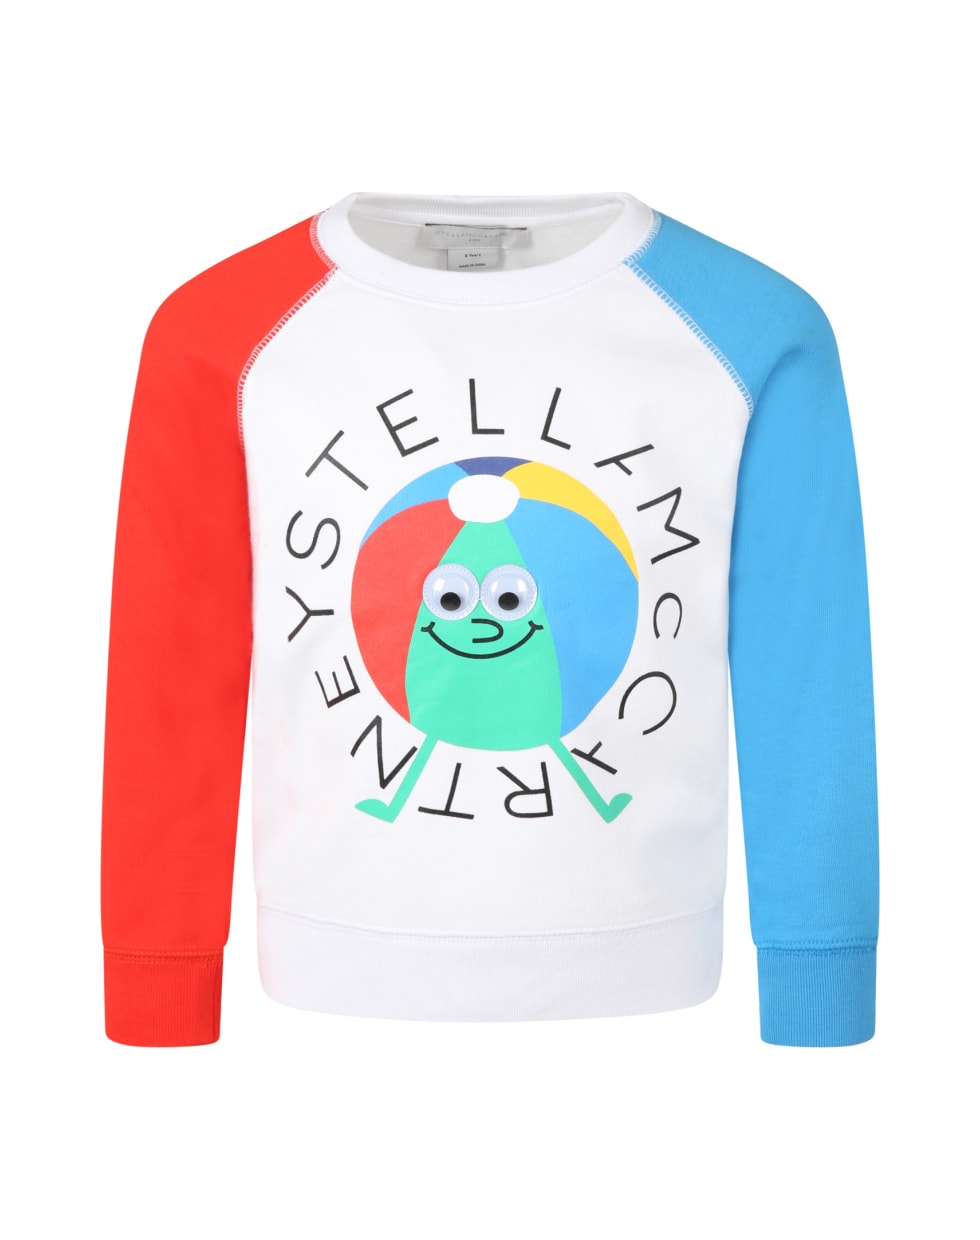 Stella McCartney Kids White Sweatshirt For Kids With Colored Ball - Multicolor